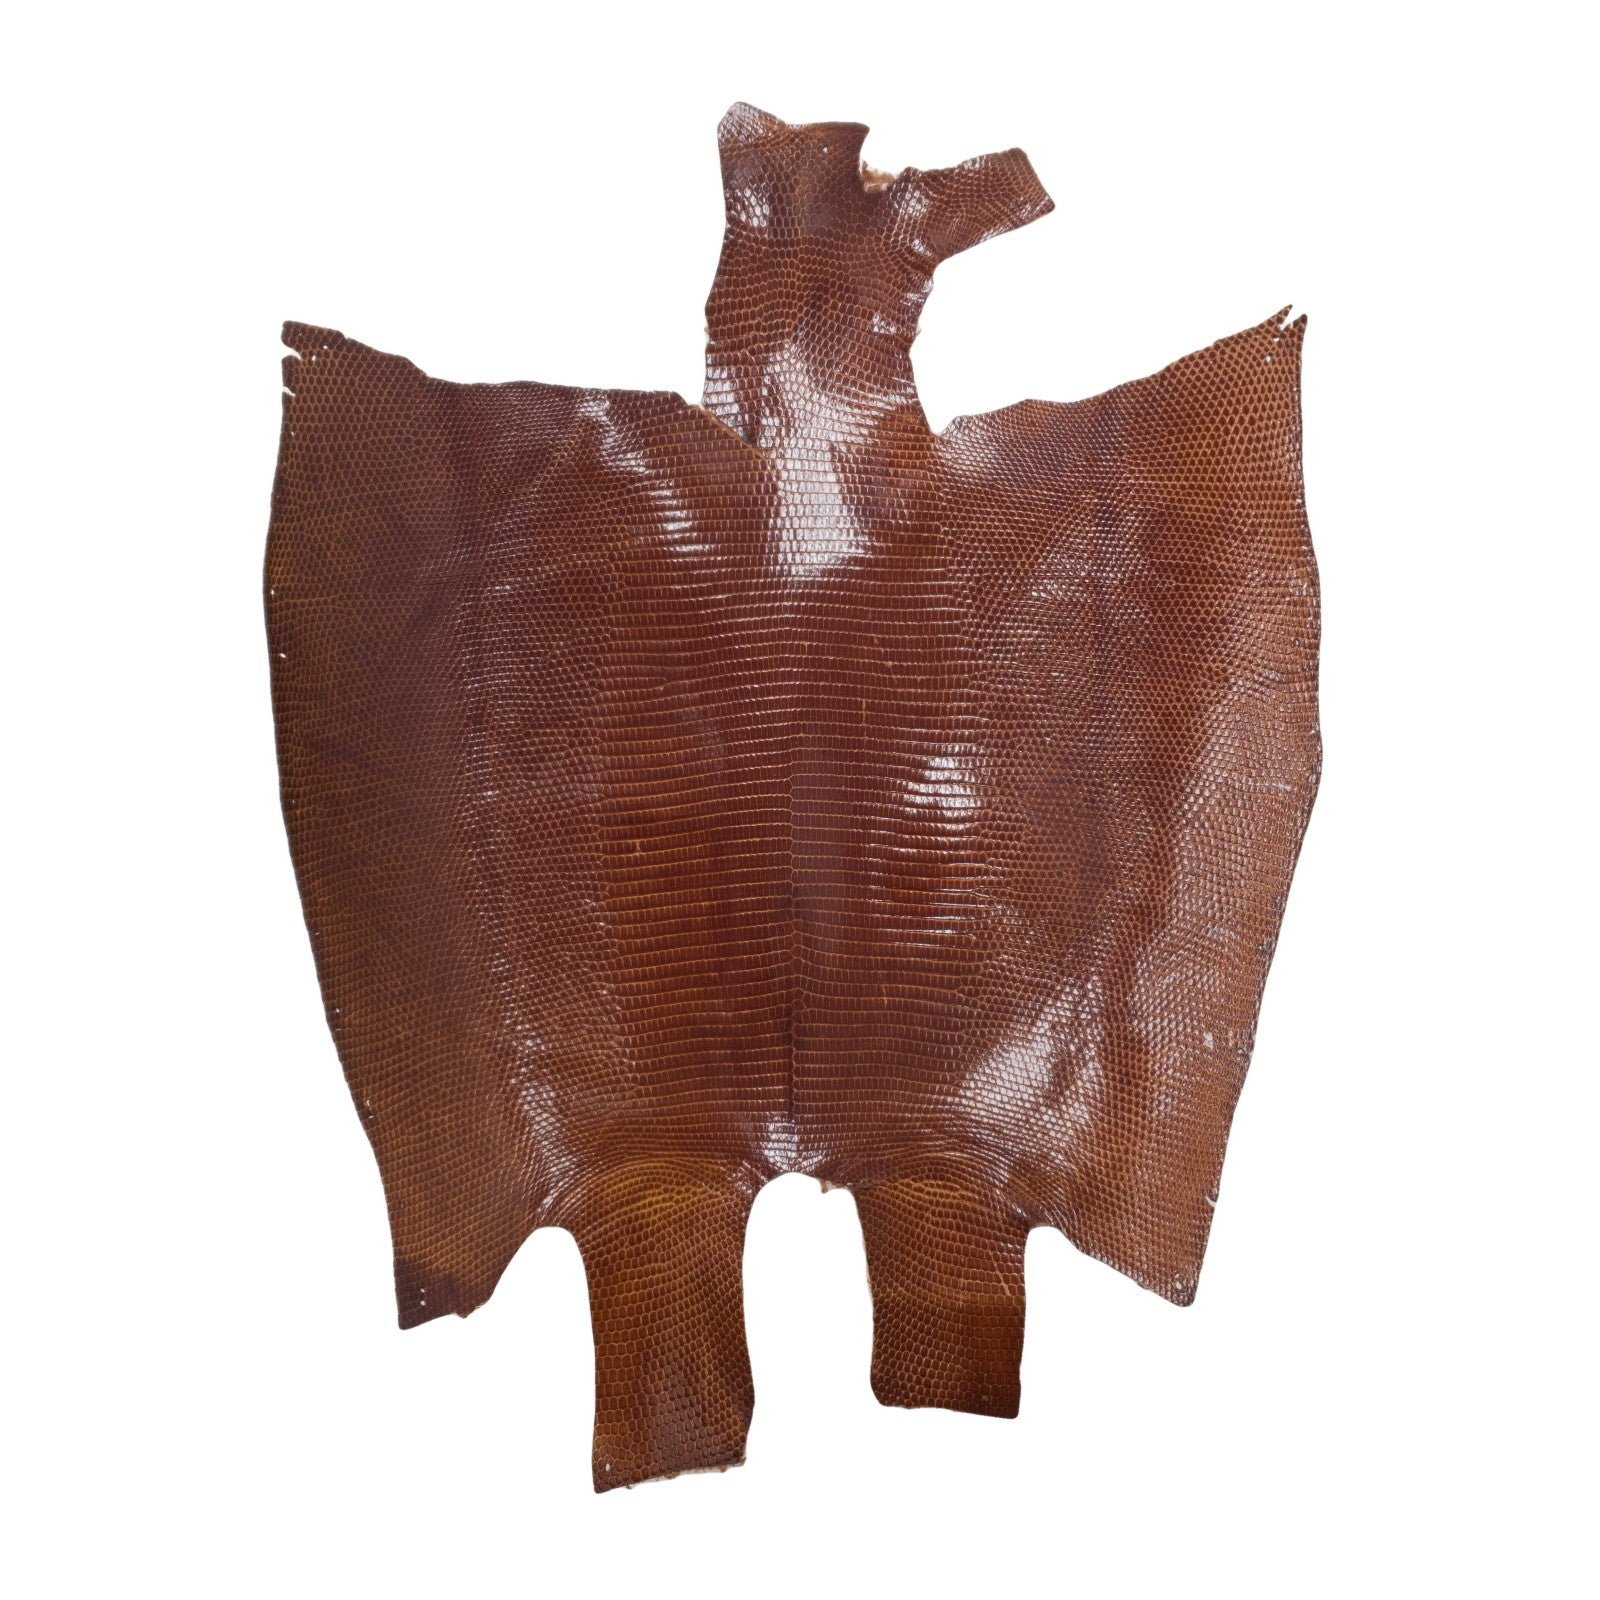 Solid Colored Lizard Skins, 1-2 oz, Medium Brown | The Leather Guy